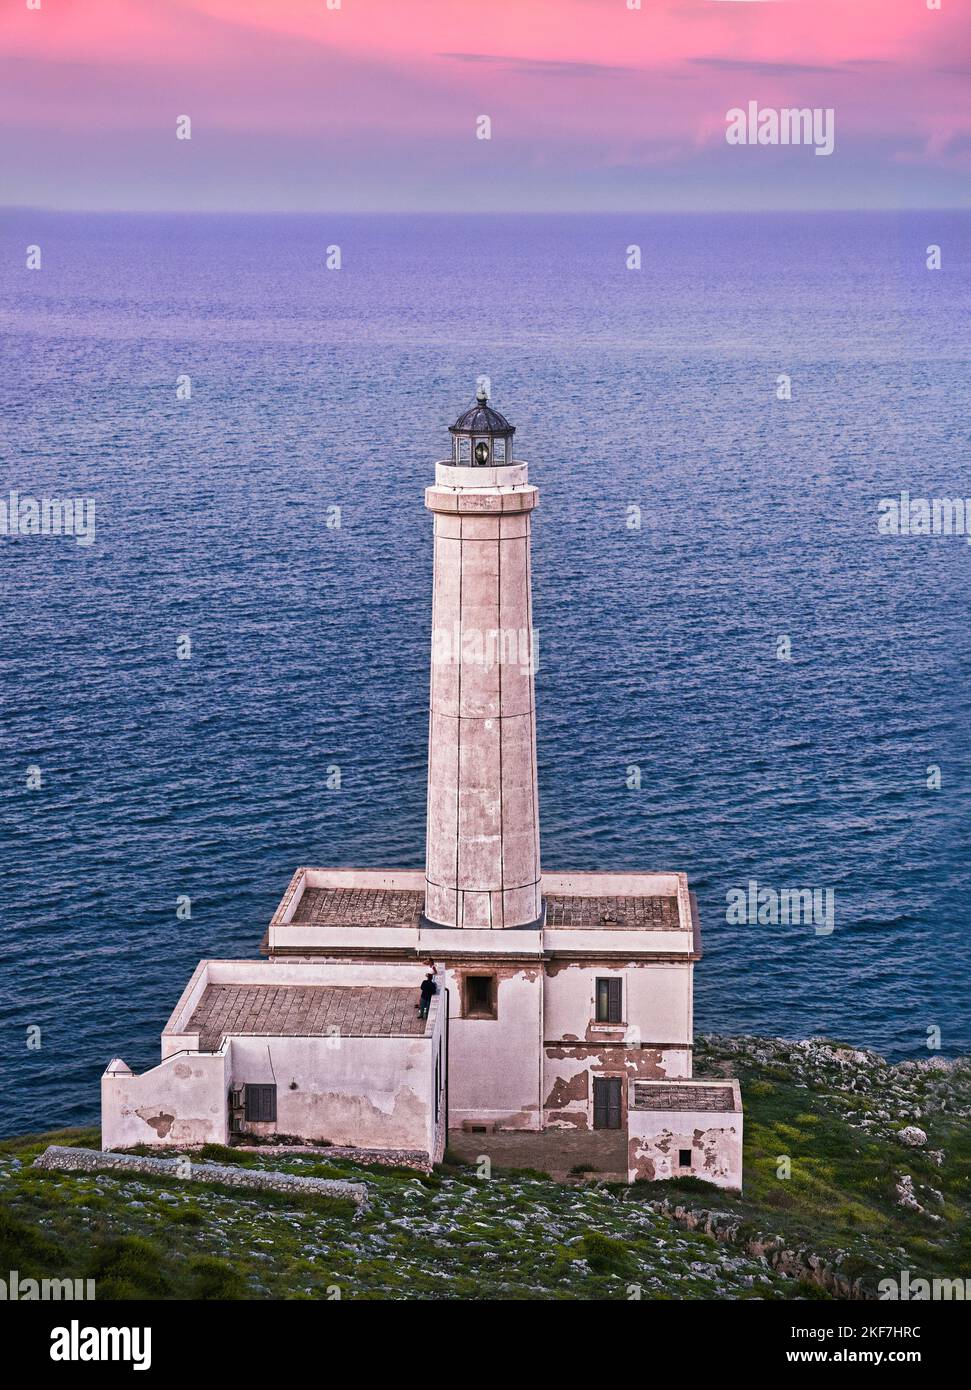 Punta Palascia lighthouse, Otranto, Puglia, Italy. One of the five most important lighthouses in the Mediterranean. Stock Photo